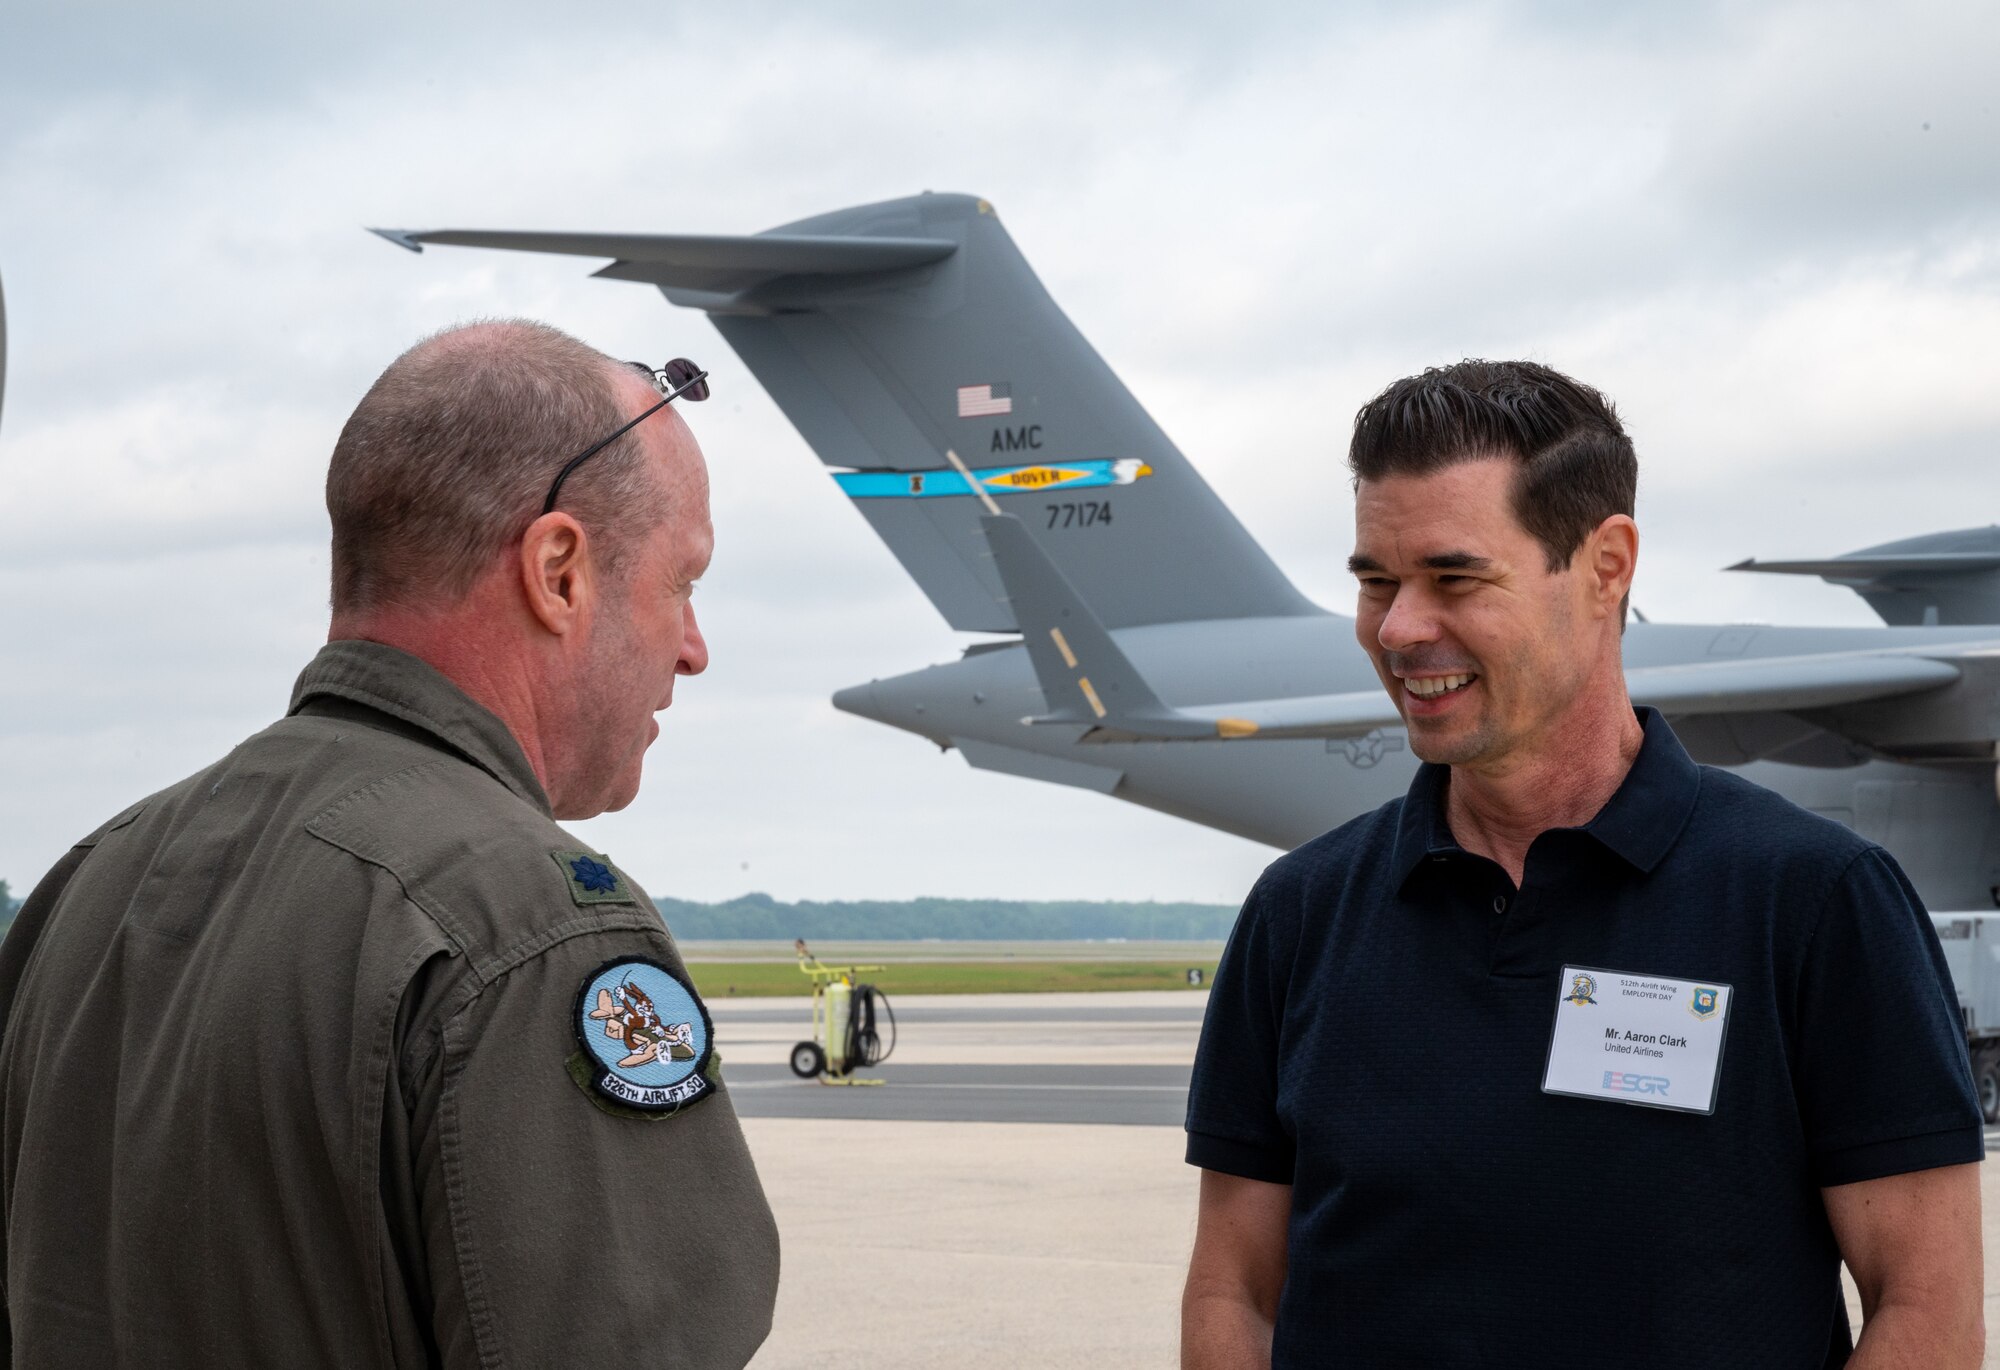 Lt. Col. John Daly, left, 326th Airlift Squadron pilot, converses with Aaron Clark, right, an Employer Support of the Guard and Reserve member, before an incentive flight on a C-17 Globemaster III at Dover Air Force Base, Delaware, June 3, 2023. ESGR, a Department of Defense office, was established in 1972 to promote cooperation and understanding between Reserve Component Service members and their civilian employers and to assist in resolving conflicts arising from an employee's military commitment. (U.S. Air Force photo by Airman 1st Class Amanda Jett)